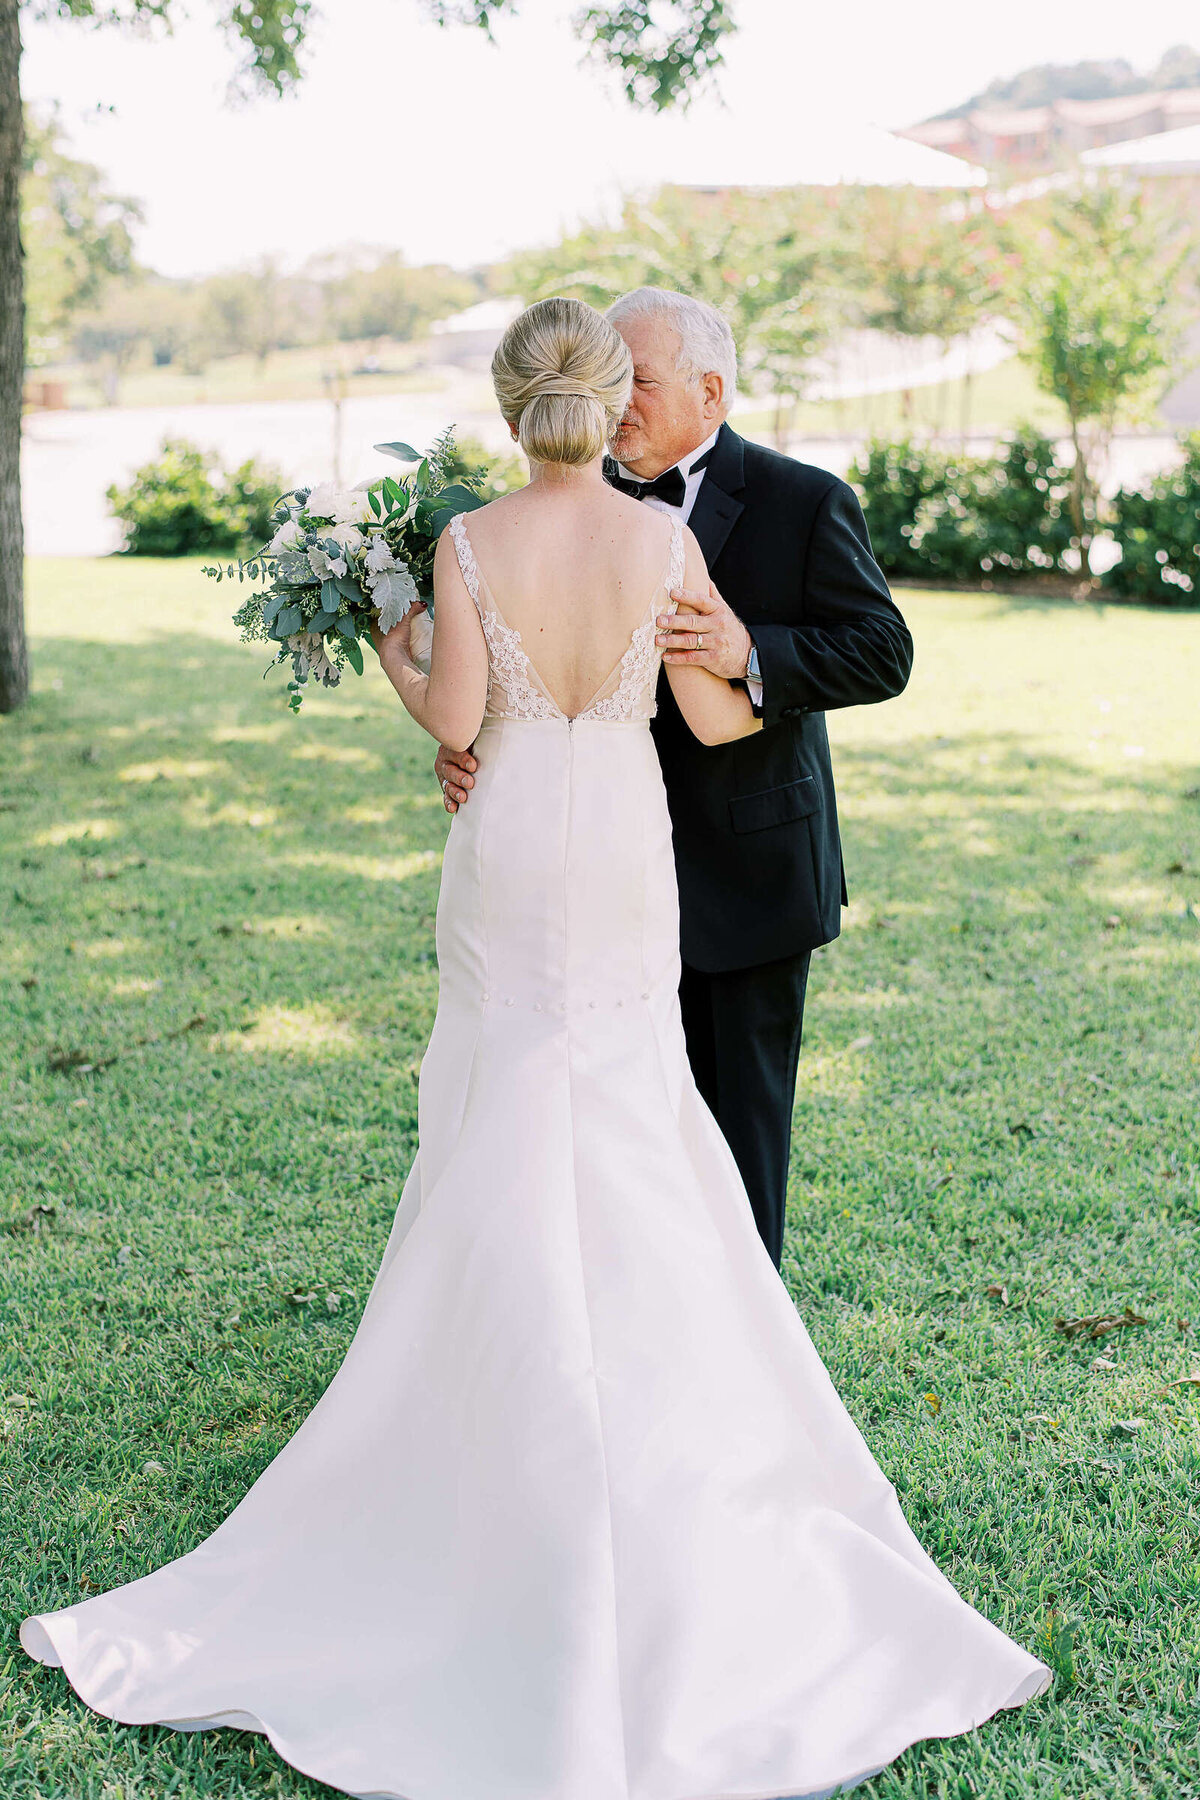 Bride's father embraces his daughter before she walks down the aisle